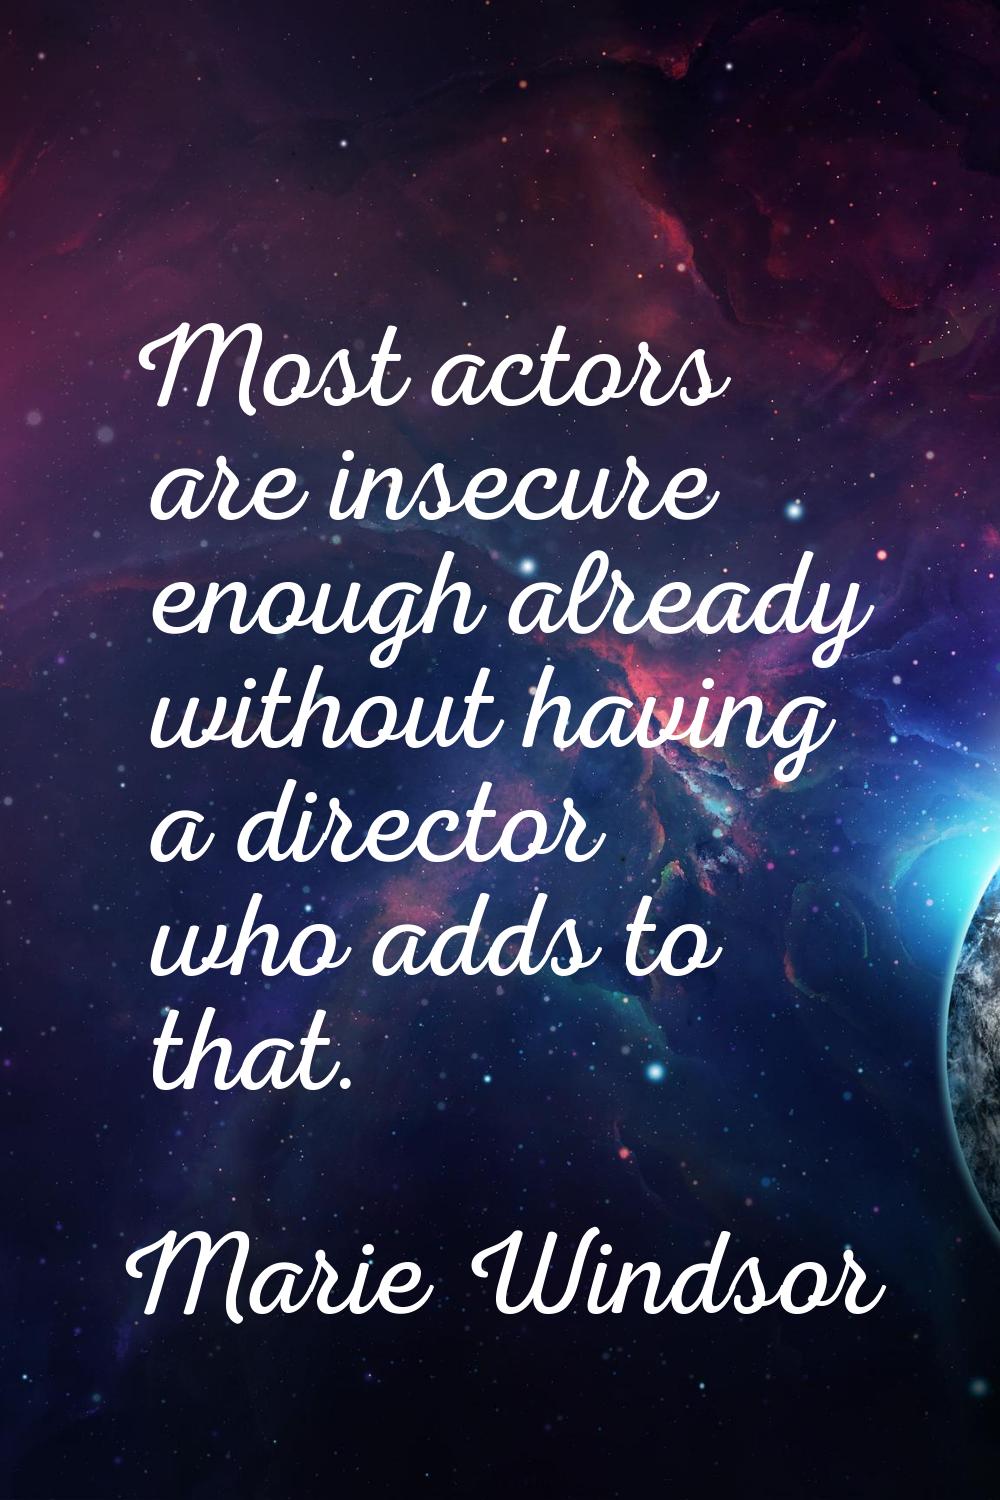 Most actors are insecure enough already without having a director who adds to that.